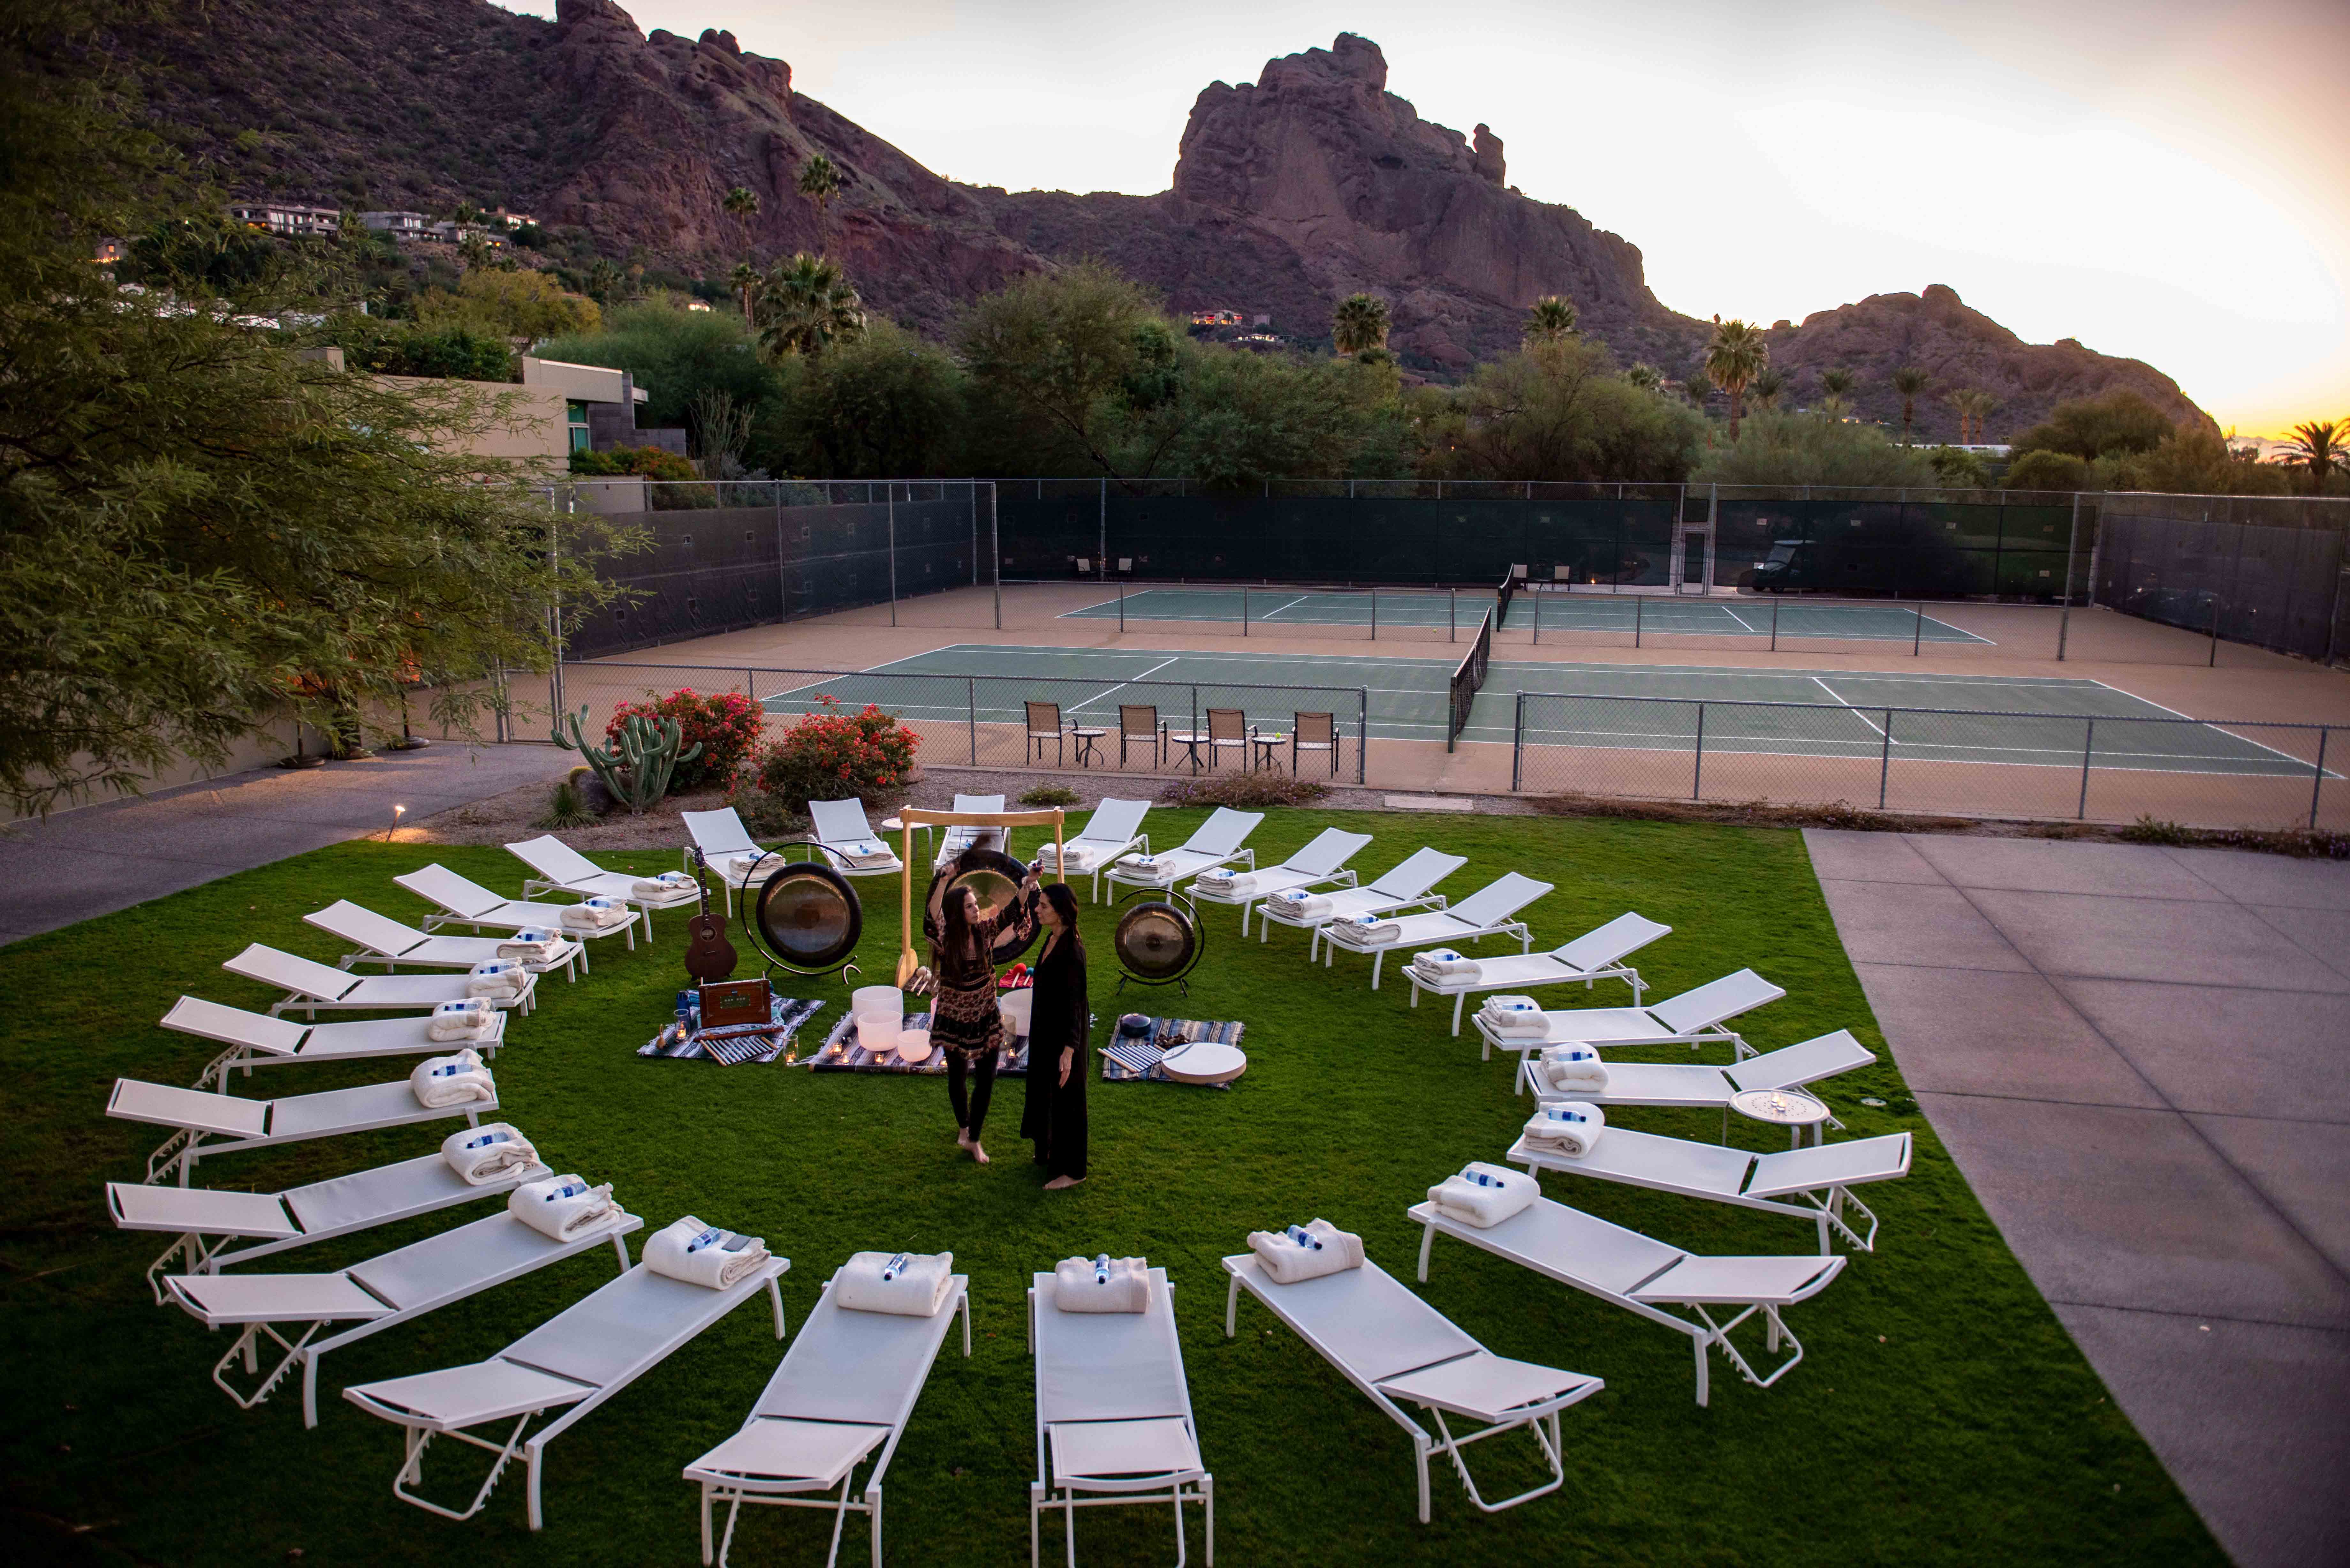 Sound Journey setup on Sanctuary's Spa Lawn with Camelback Mountain in background.